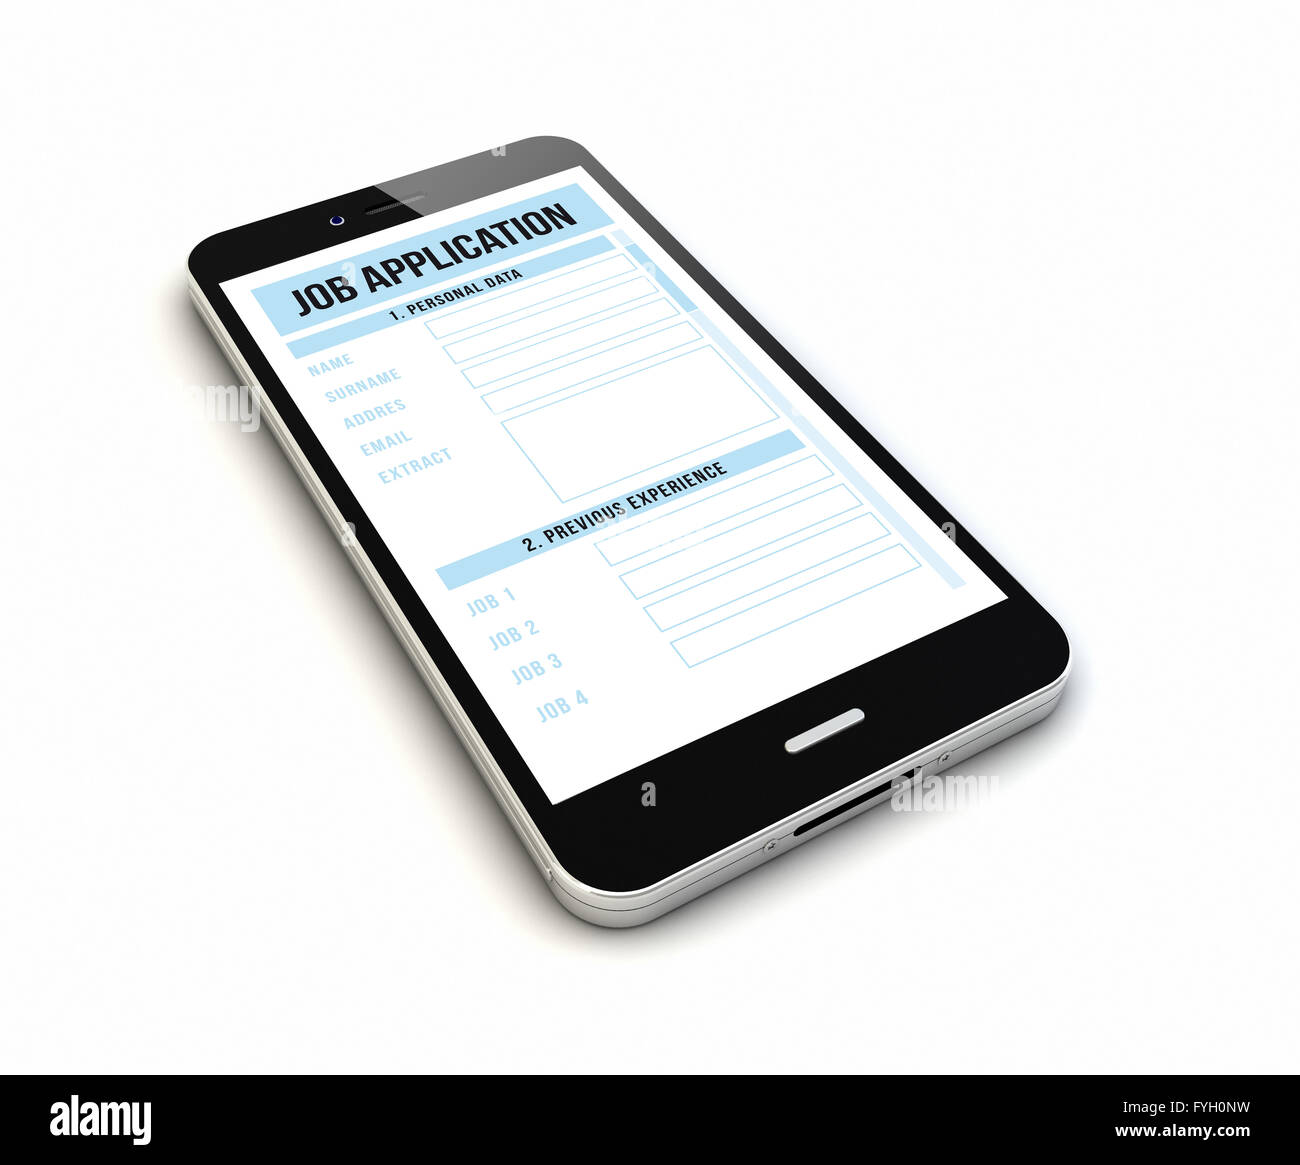 render of an original smartphone with job application on the screen Stock Photo